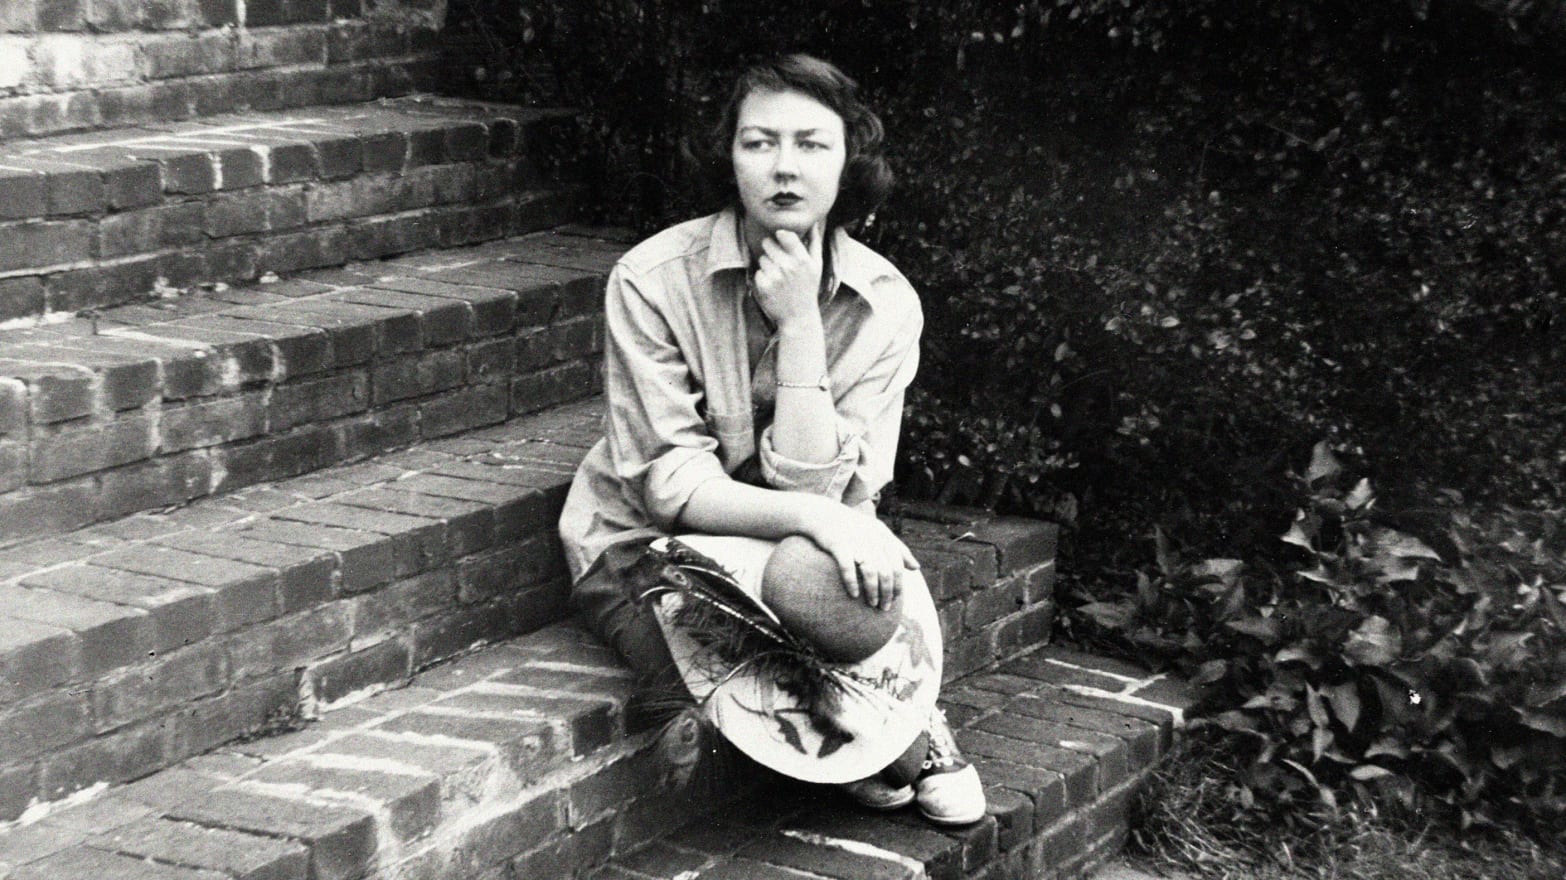 A photograph of Flannery O'Connor sitting on the steps of her home in Milledgeville, Ga. on Sept. 22, 1959.